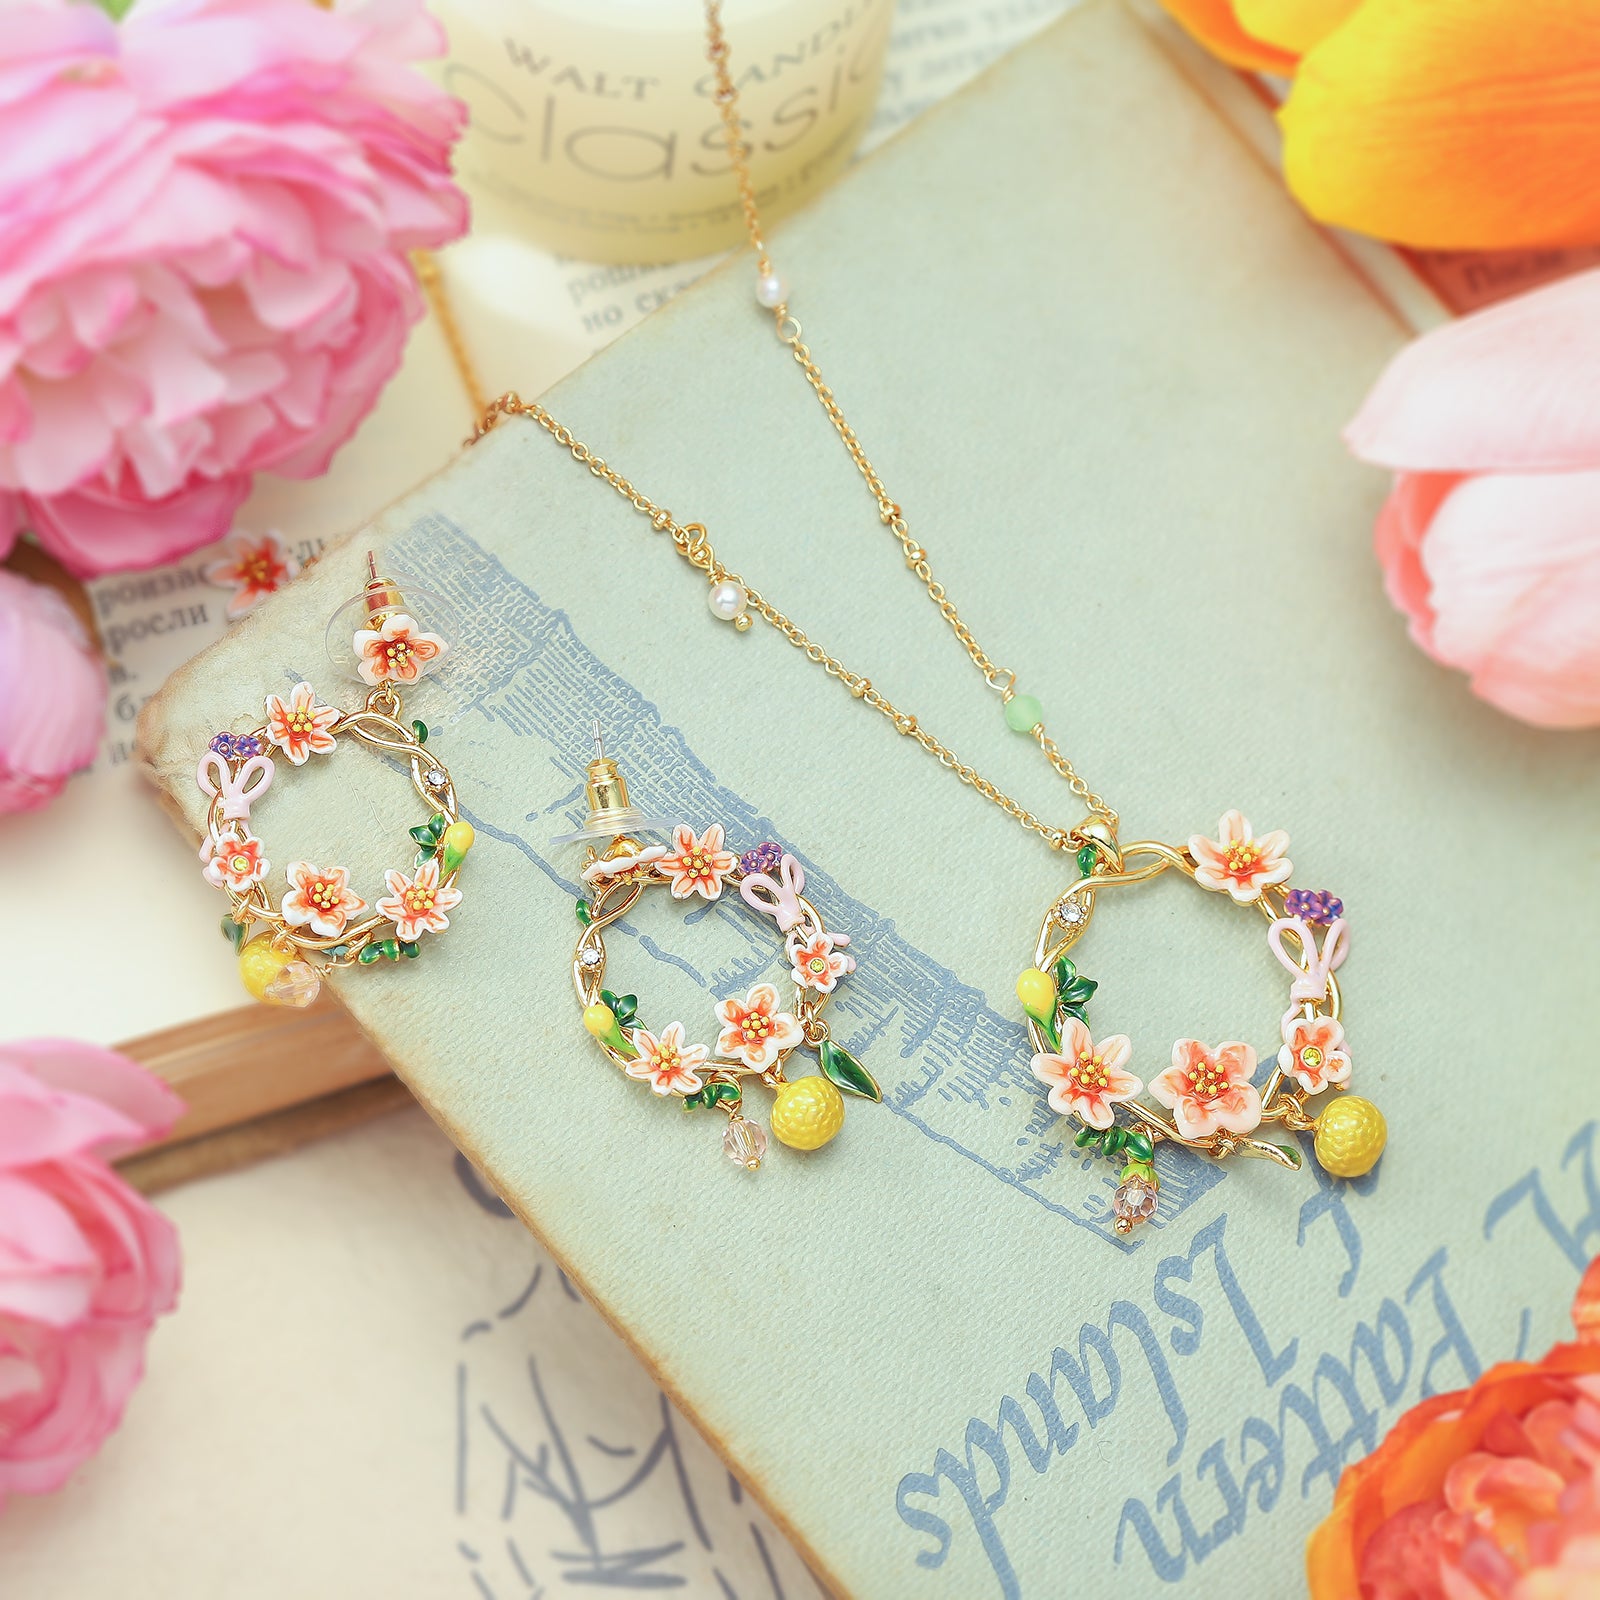 Orange Garland Necklace and Earrings